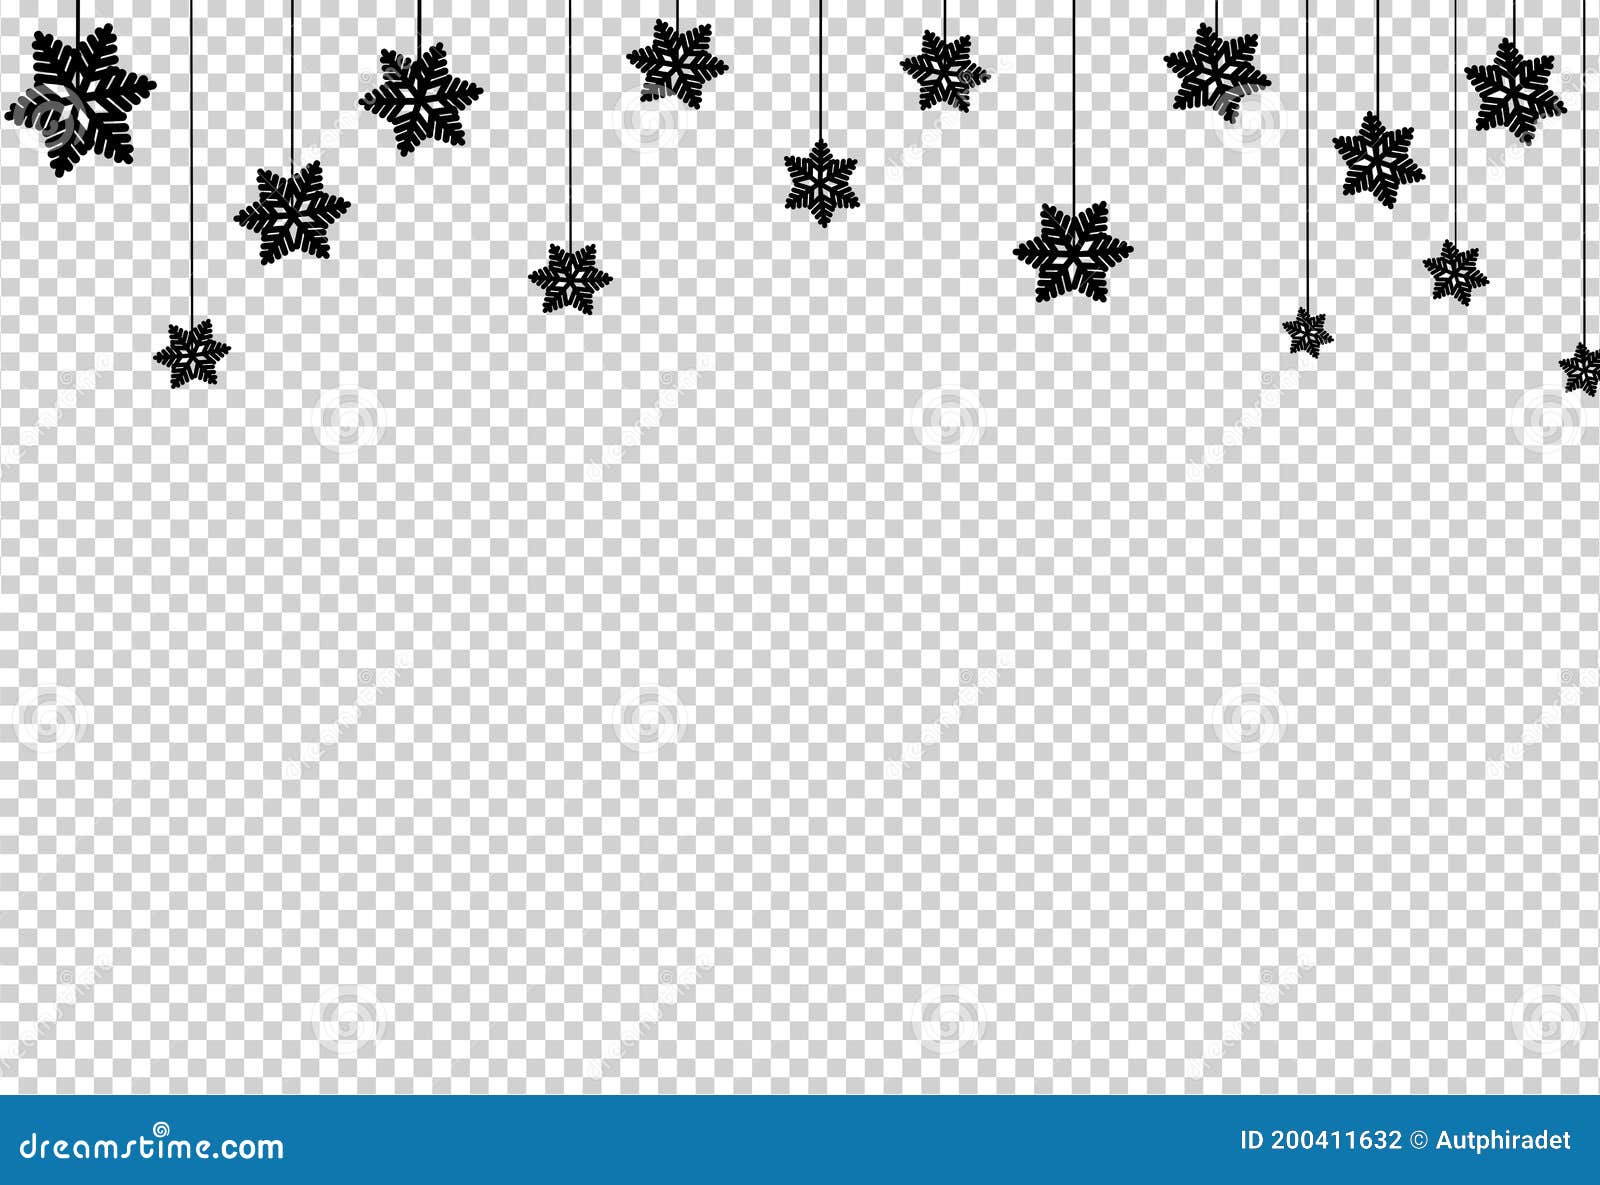 Black Flat Snowflakes Hanging from Top ,Christmas Decoration Isolated on Png  or Transparent Background, Space for Text, Sale Stock Vector - Illustration  of flat, elements: 200411632